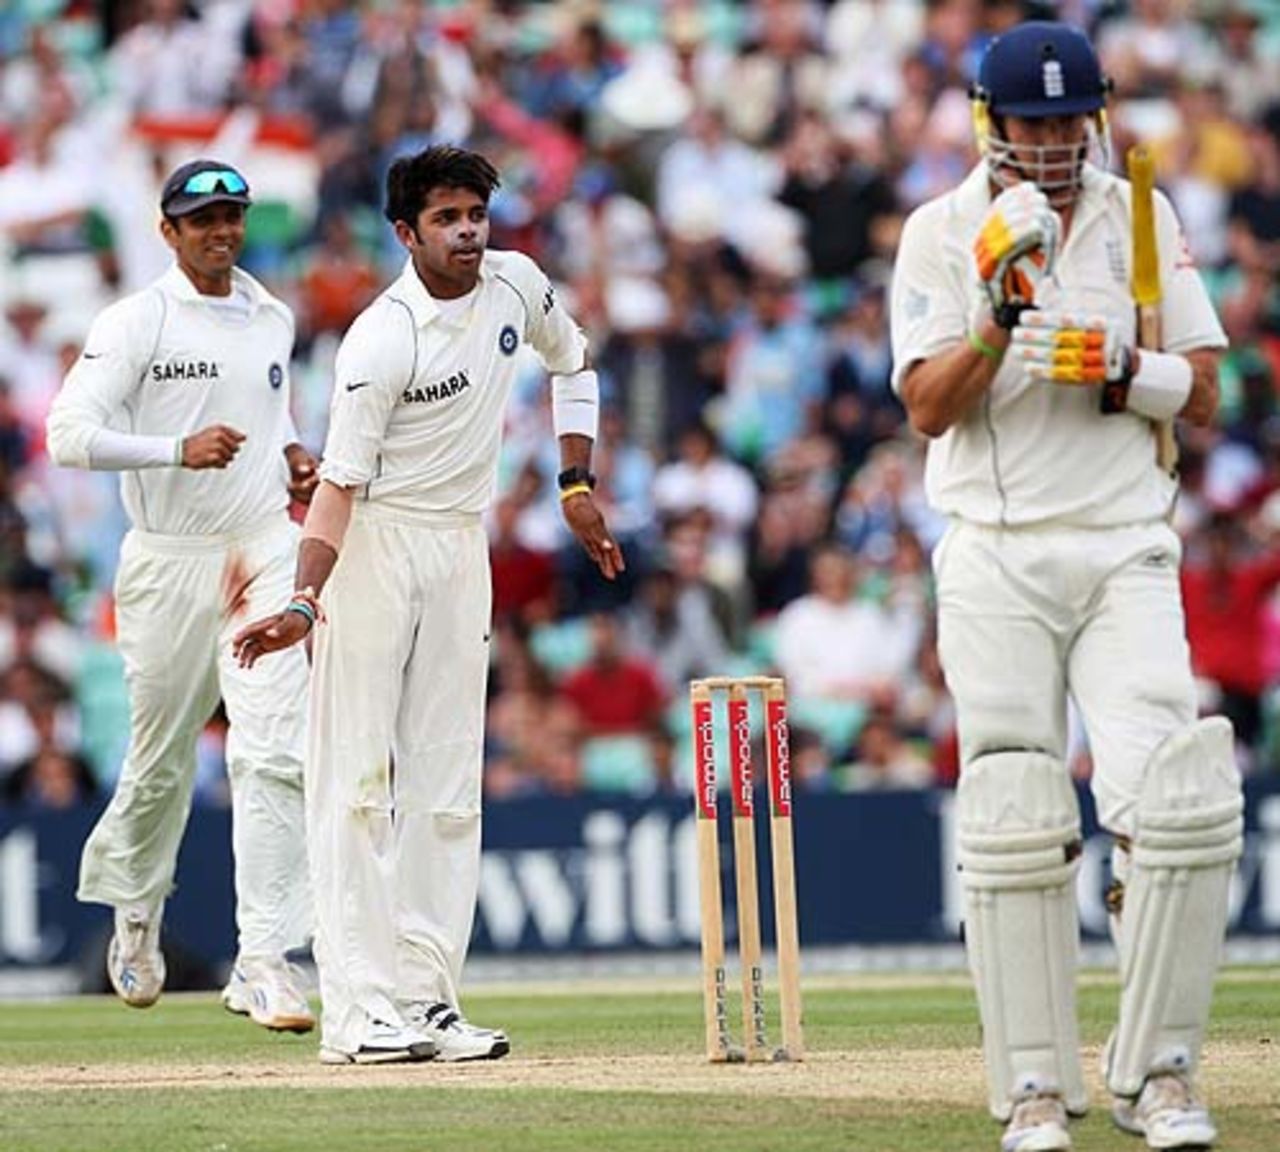 Sreesanth breaks into a dance after getting the better of Kevin Pietersen, England v India, 3rd Test, The Oval, 5th day, August 13, 2007